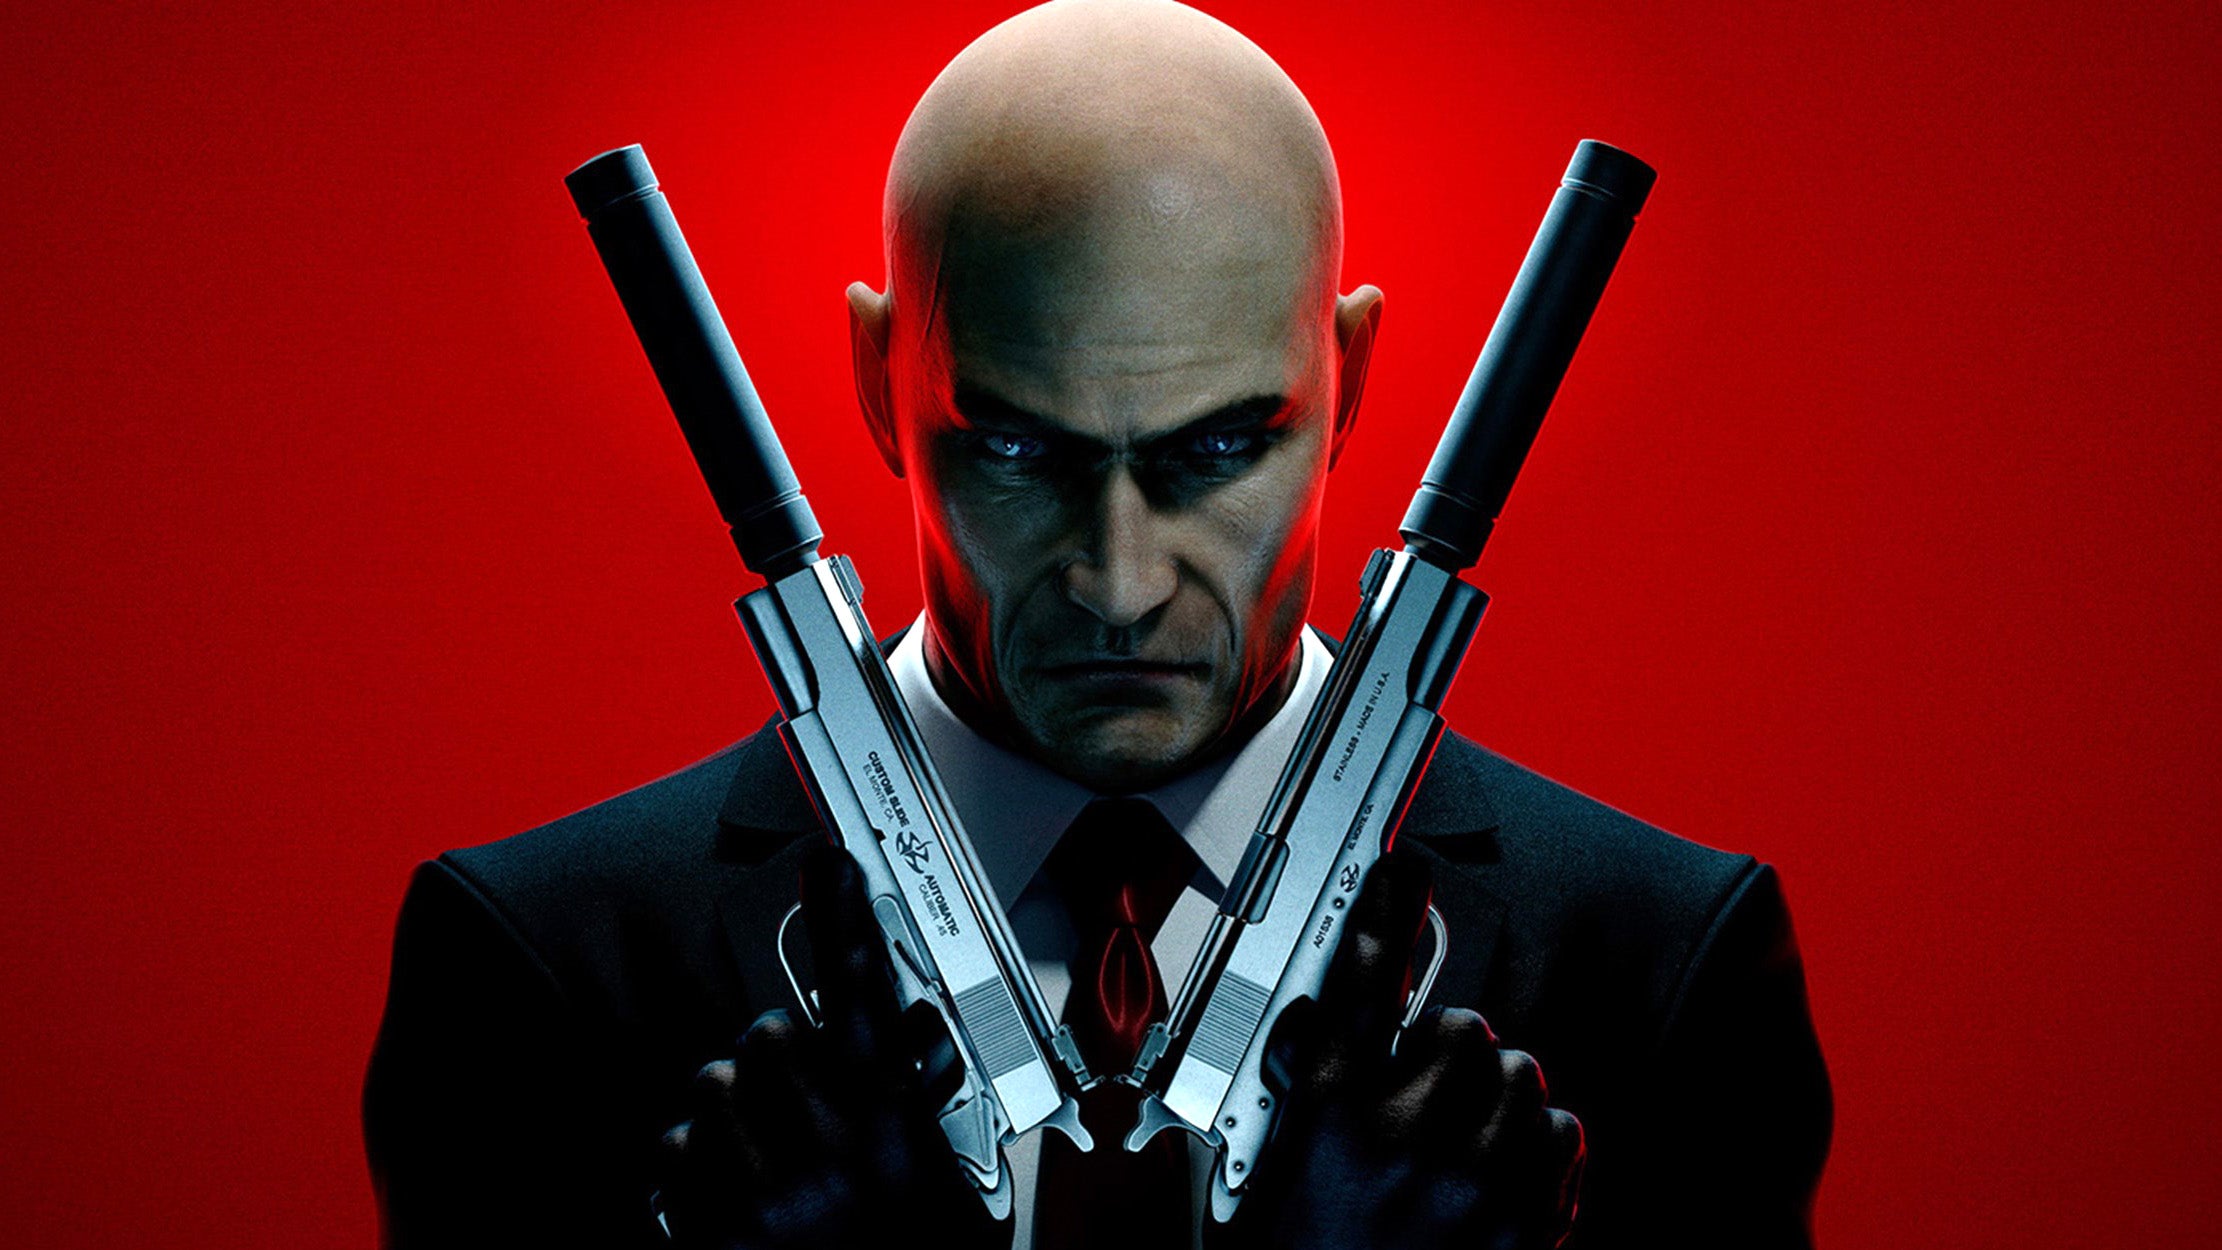 Hitman's Agent 47, close-up, arms pressed to his chest and holding two guns, with silences framing either side of his sinister face.  The background is blood red.